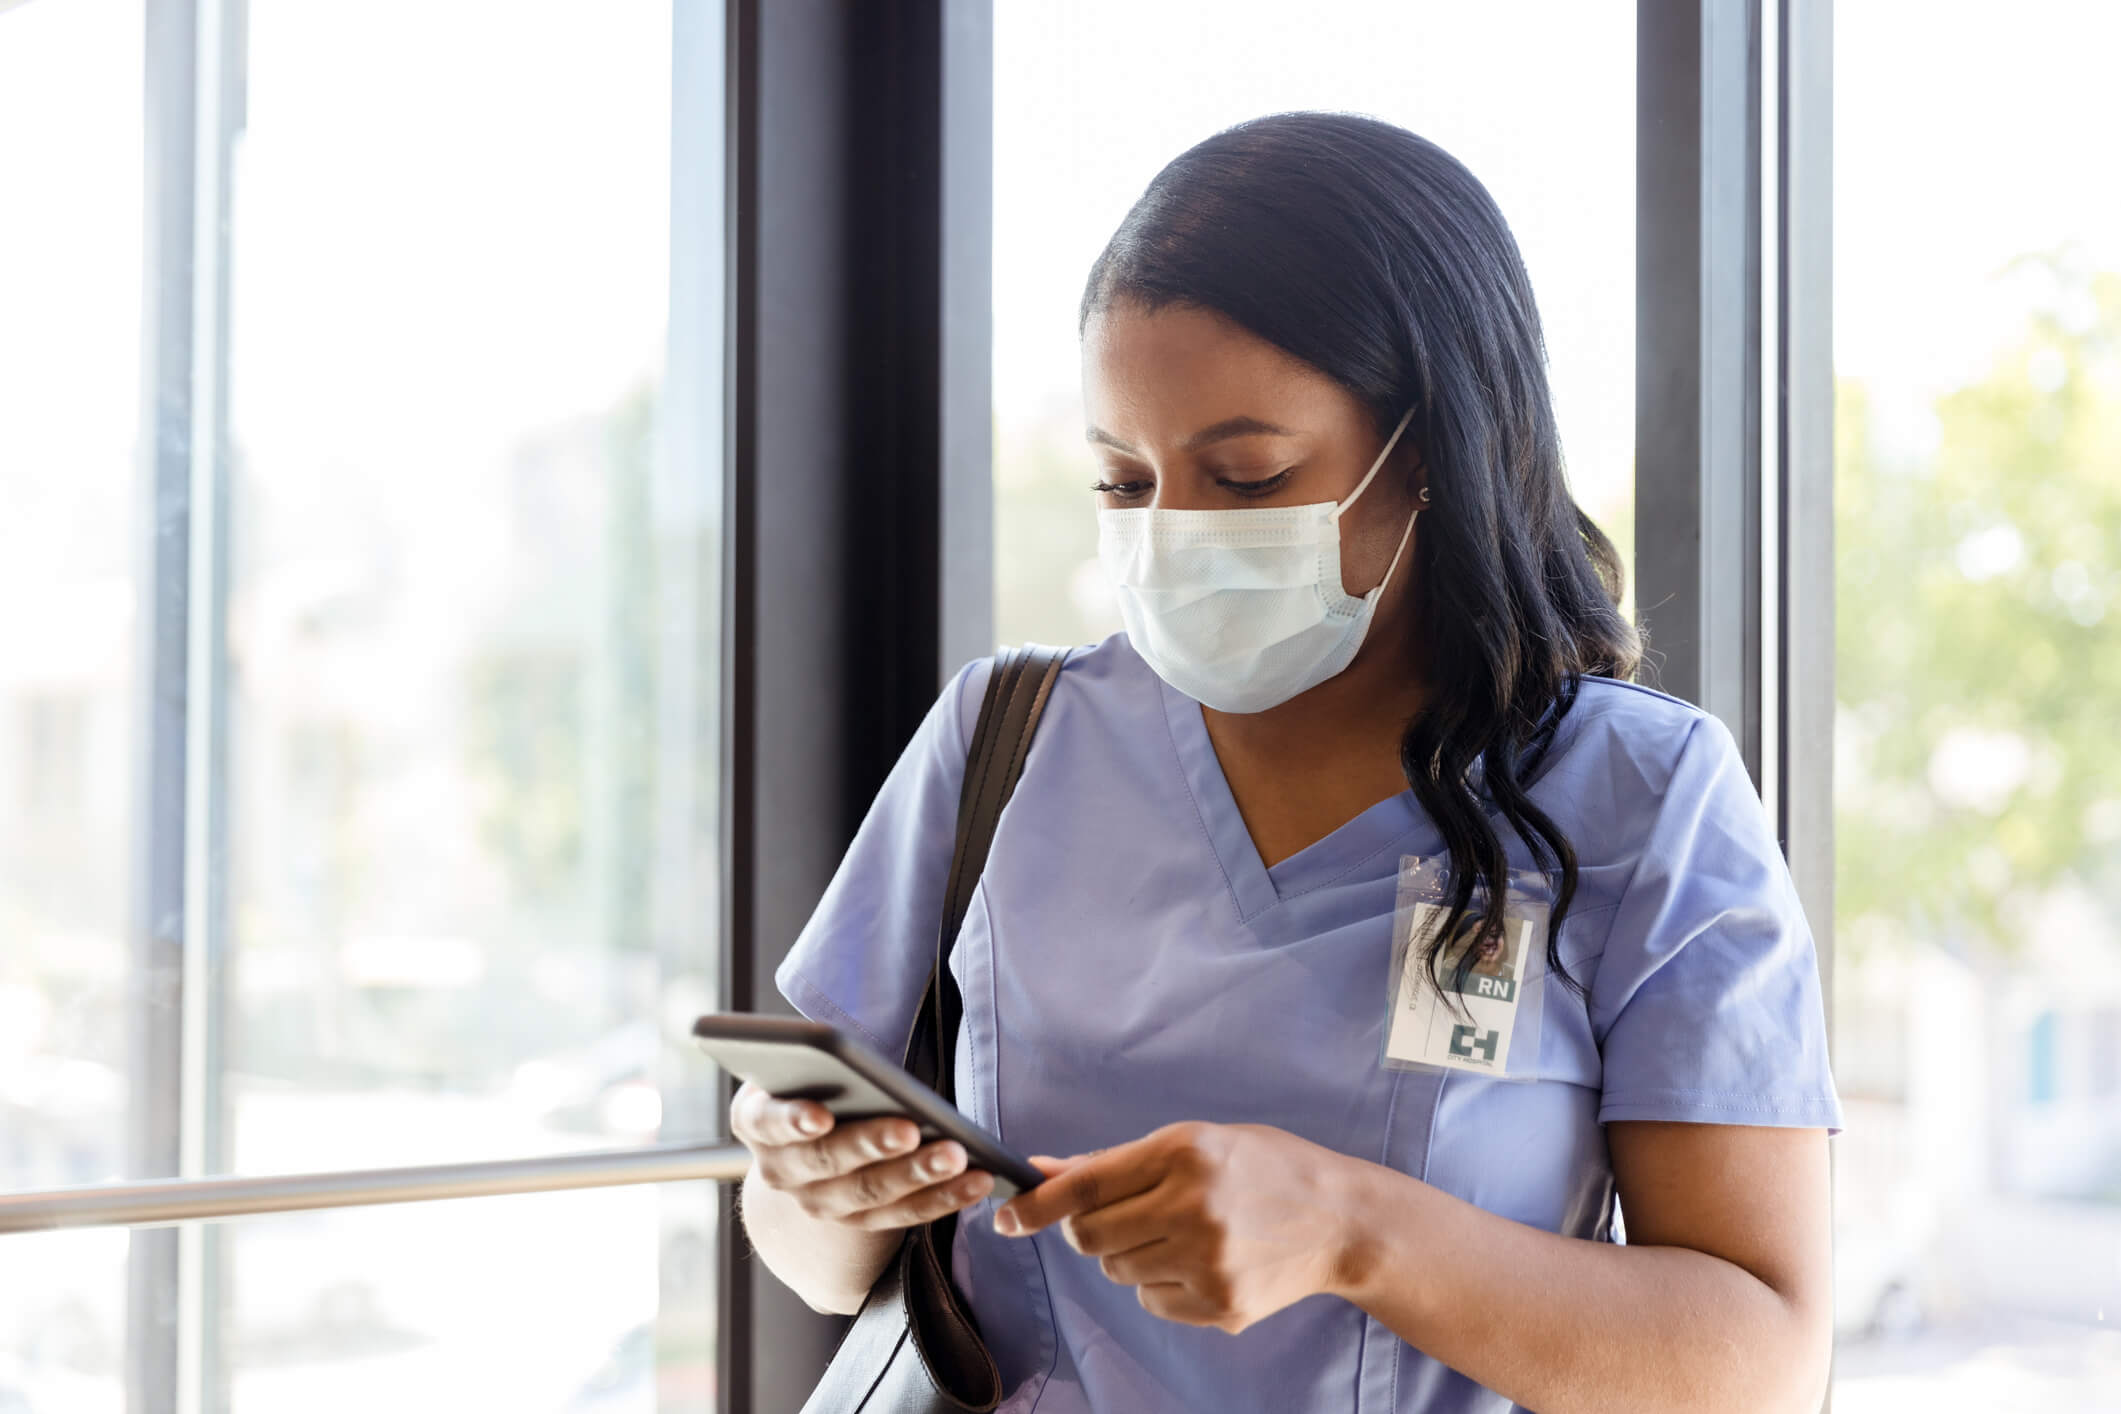 As a female nurse walks in a hospital hallway, she uses a smartphone to check her messages. She is wearing a surgical mask as she walks in the hospital.